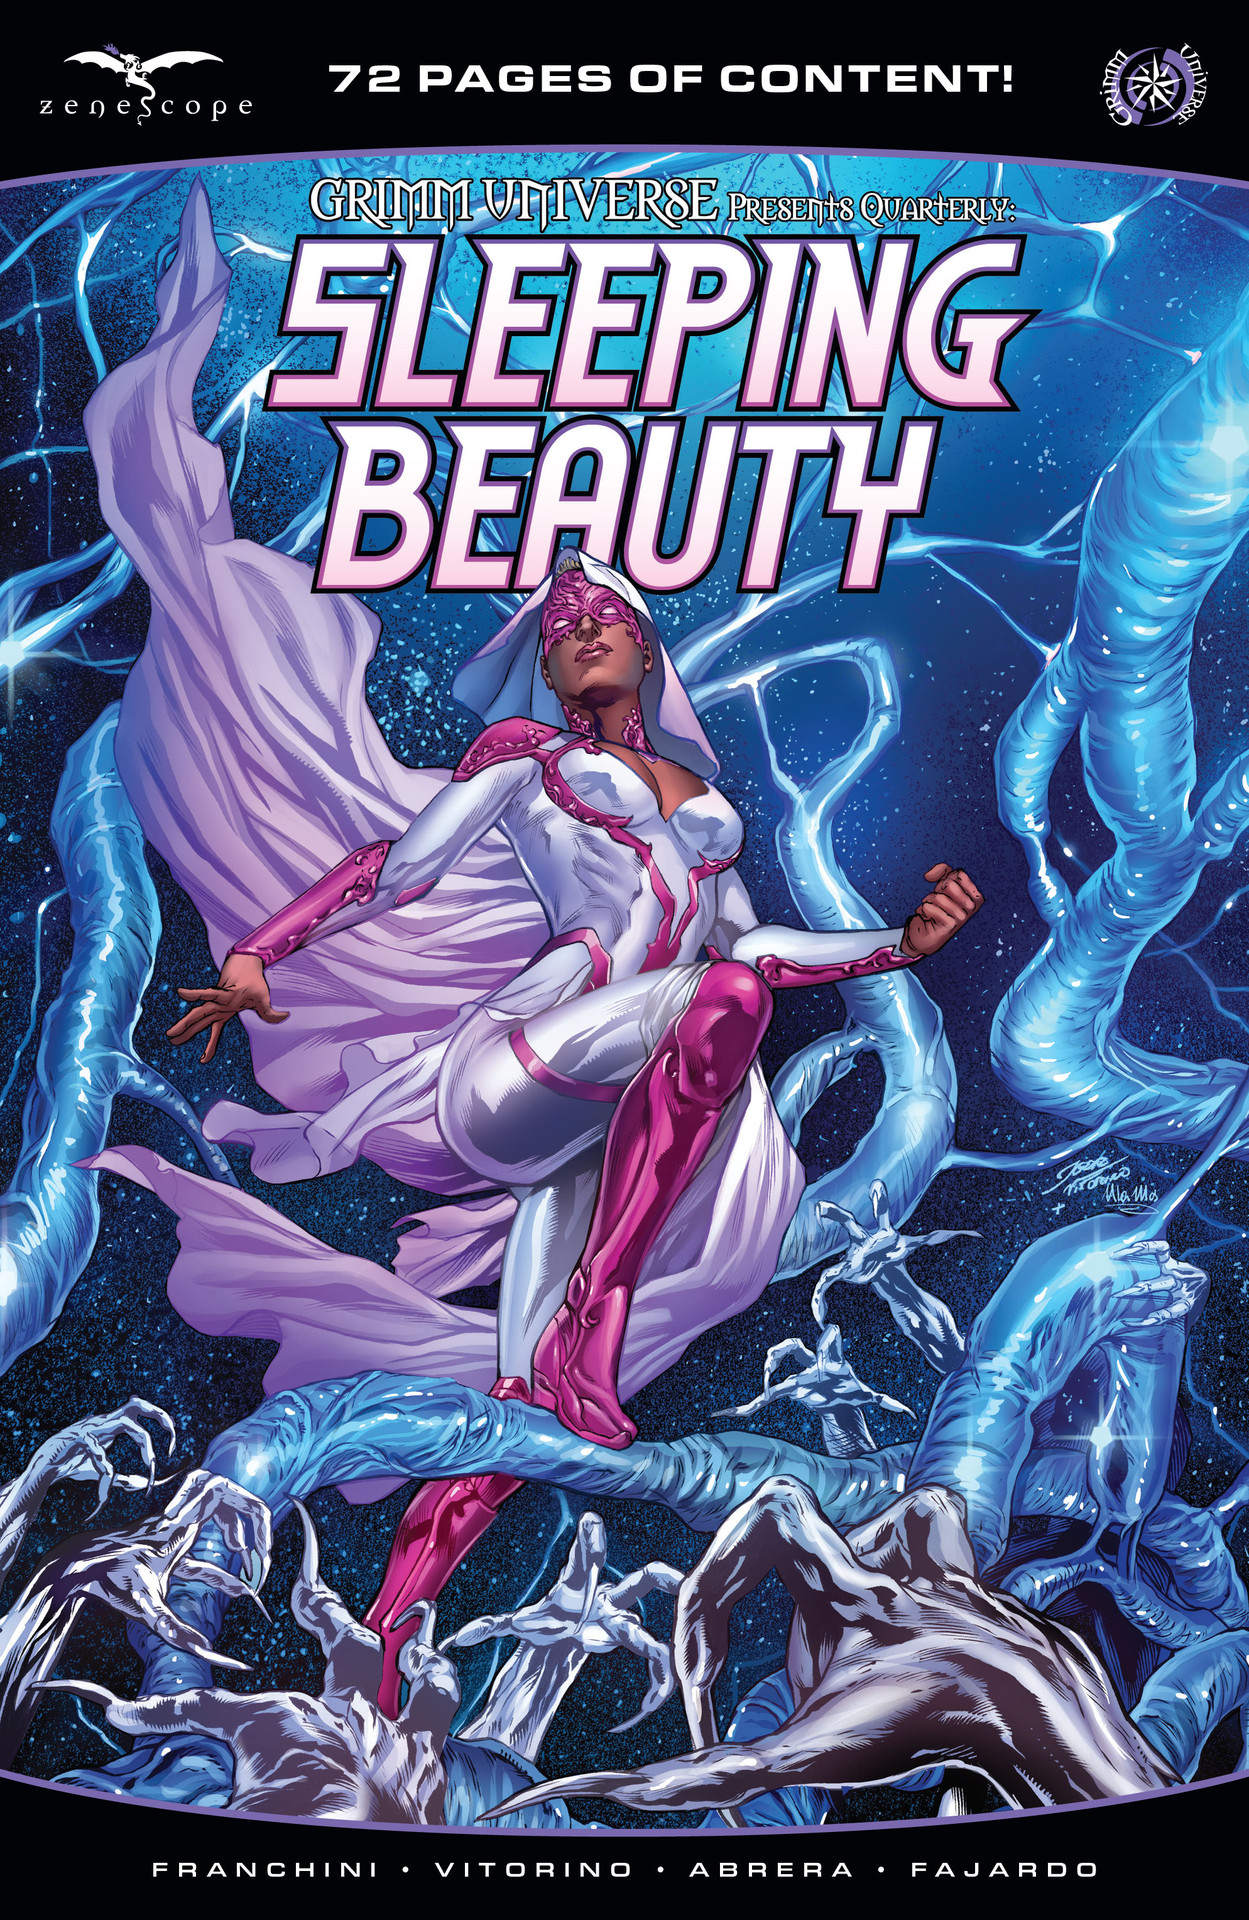 Read online Grimm Universe Presents Quarterly: Sleeping Beauty comic -  Issue # Full - 1